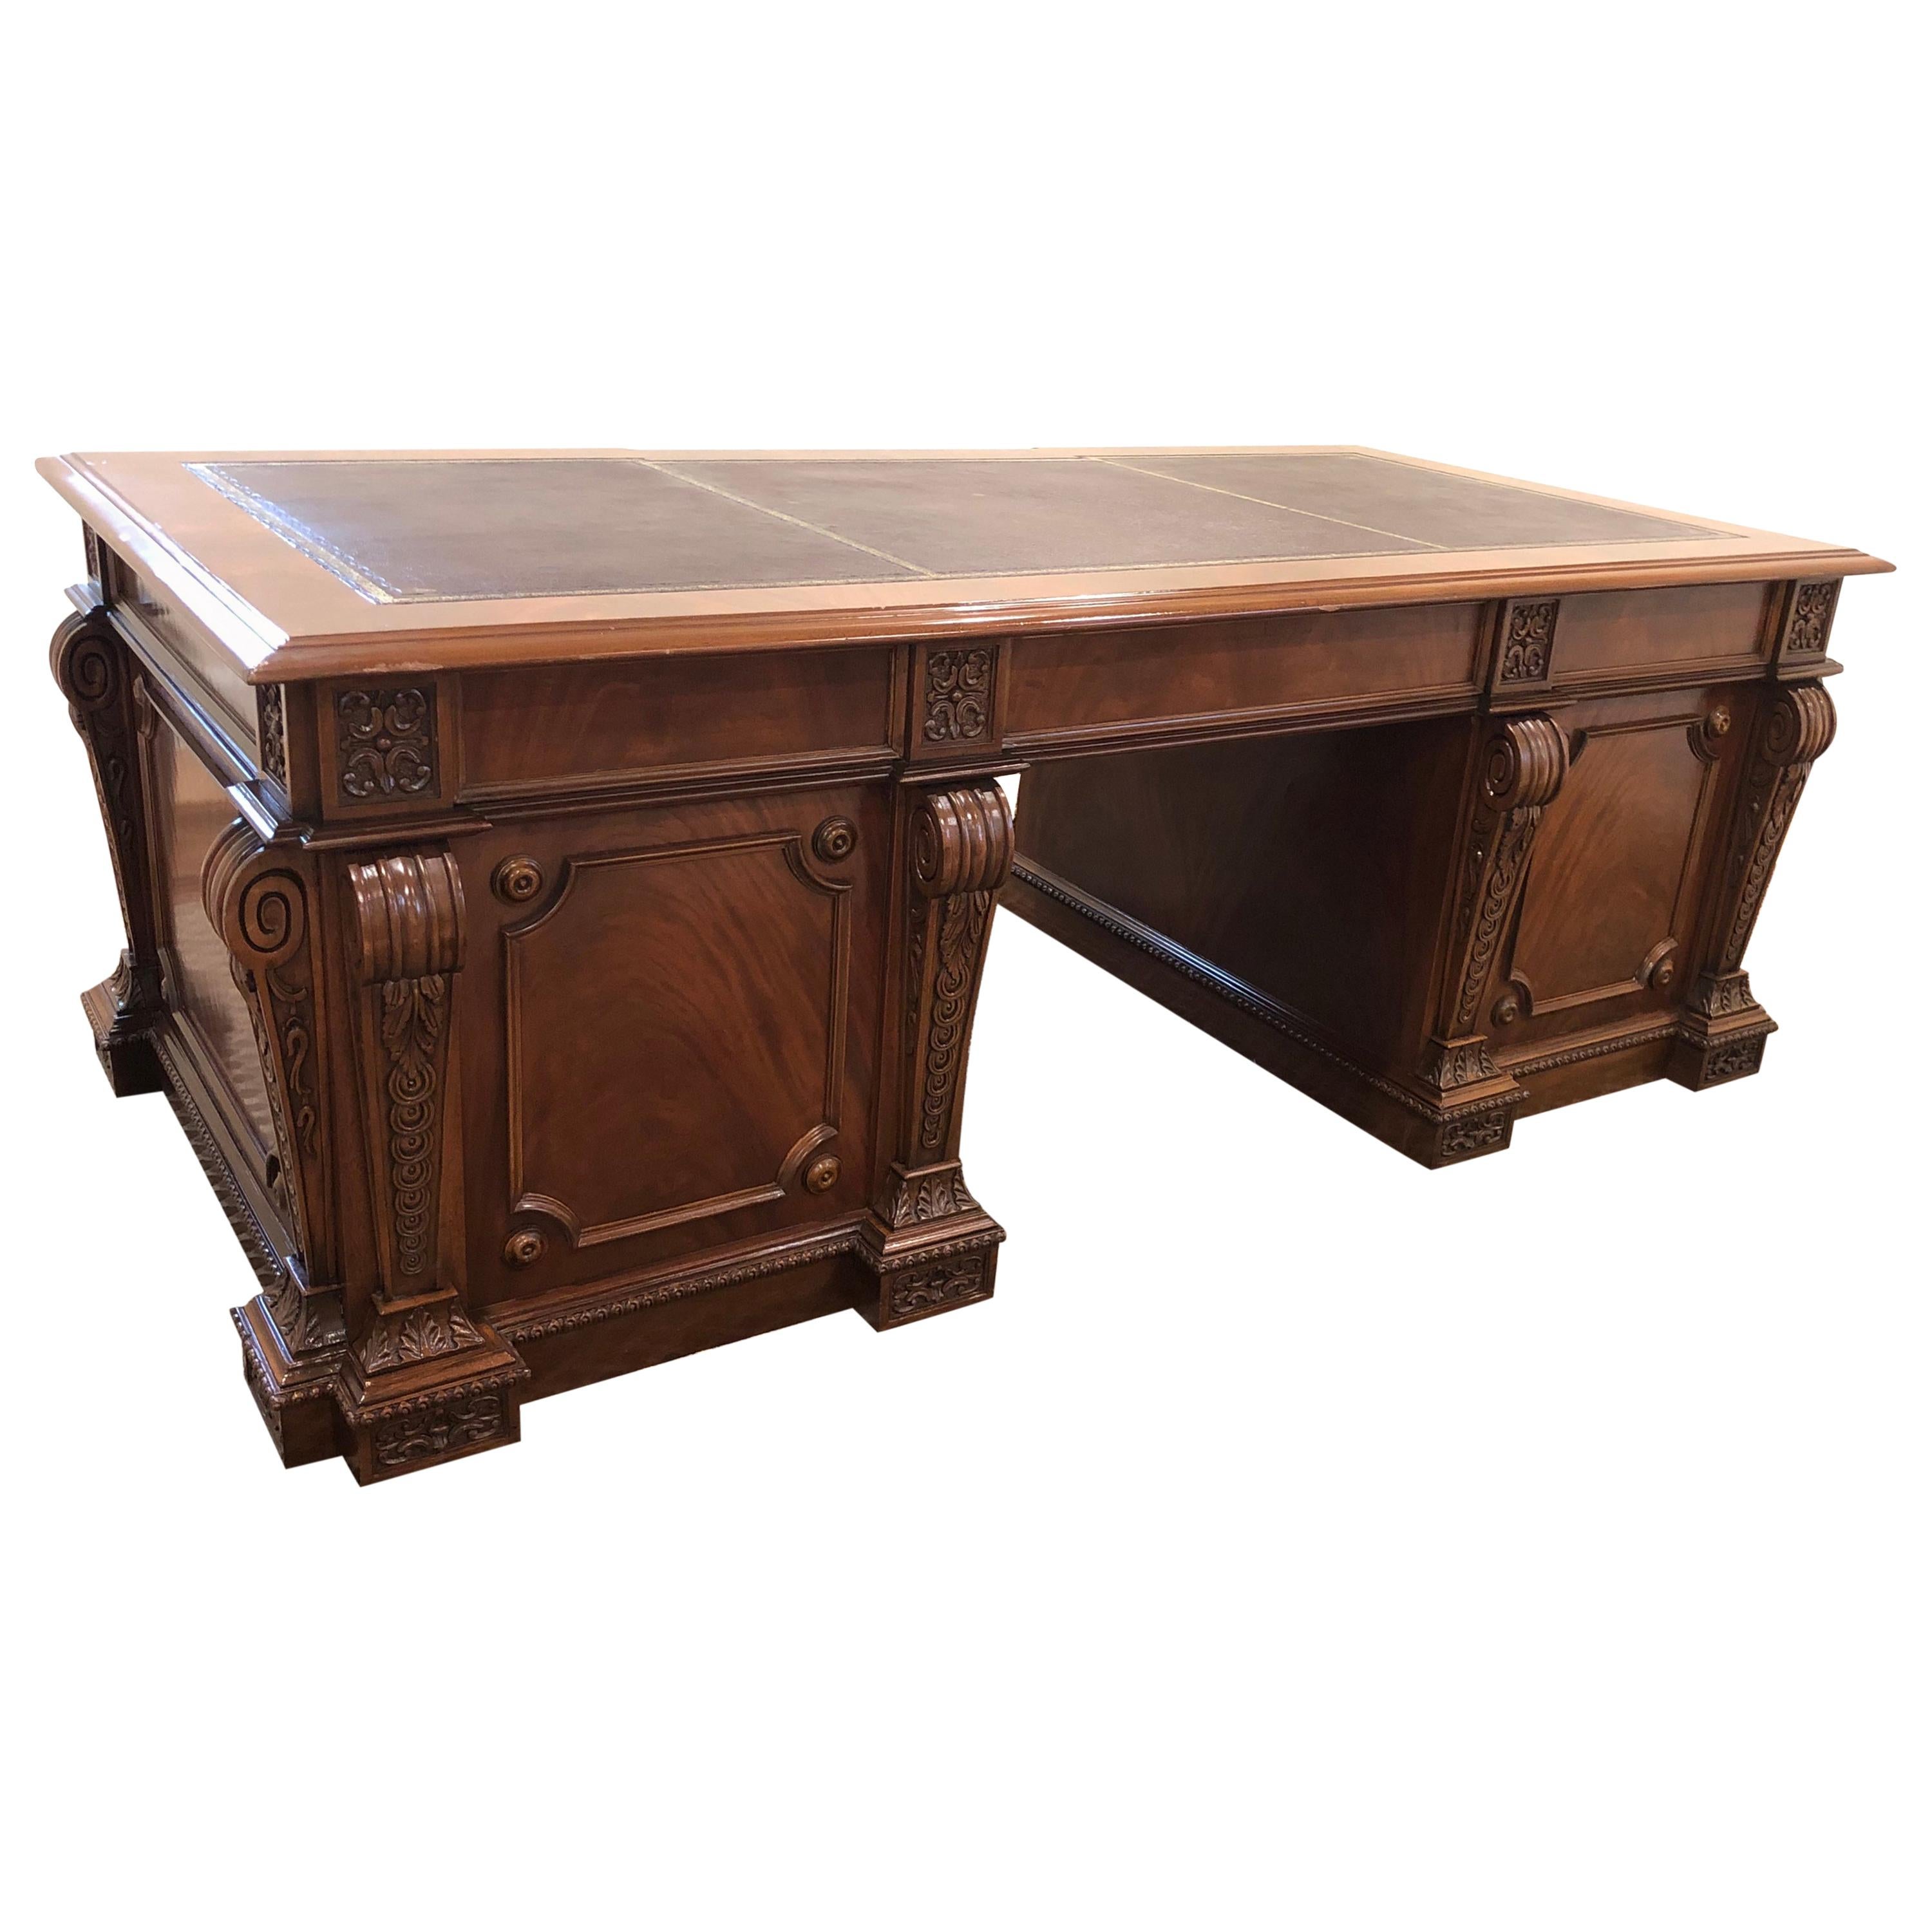 Regency Mahogany Twin Pedestal Desk with Gold Tooled Leather Top